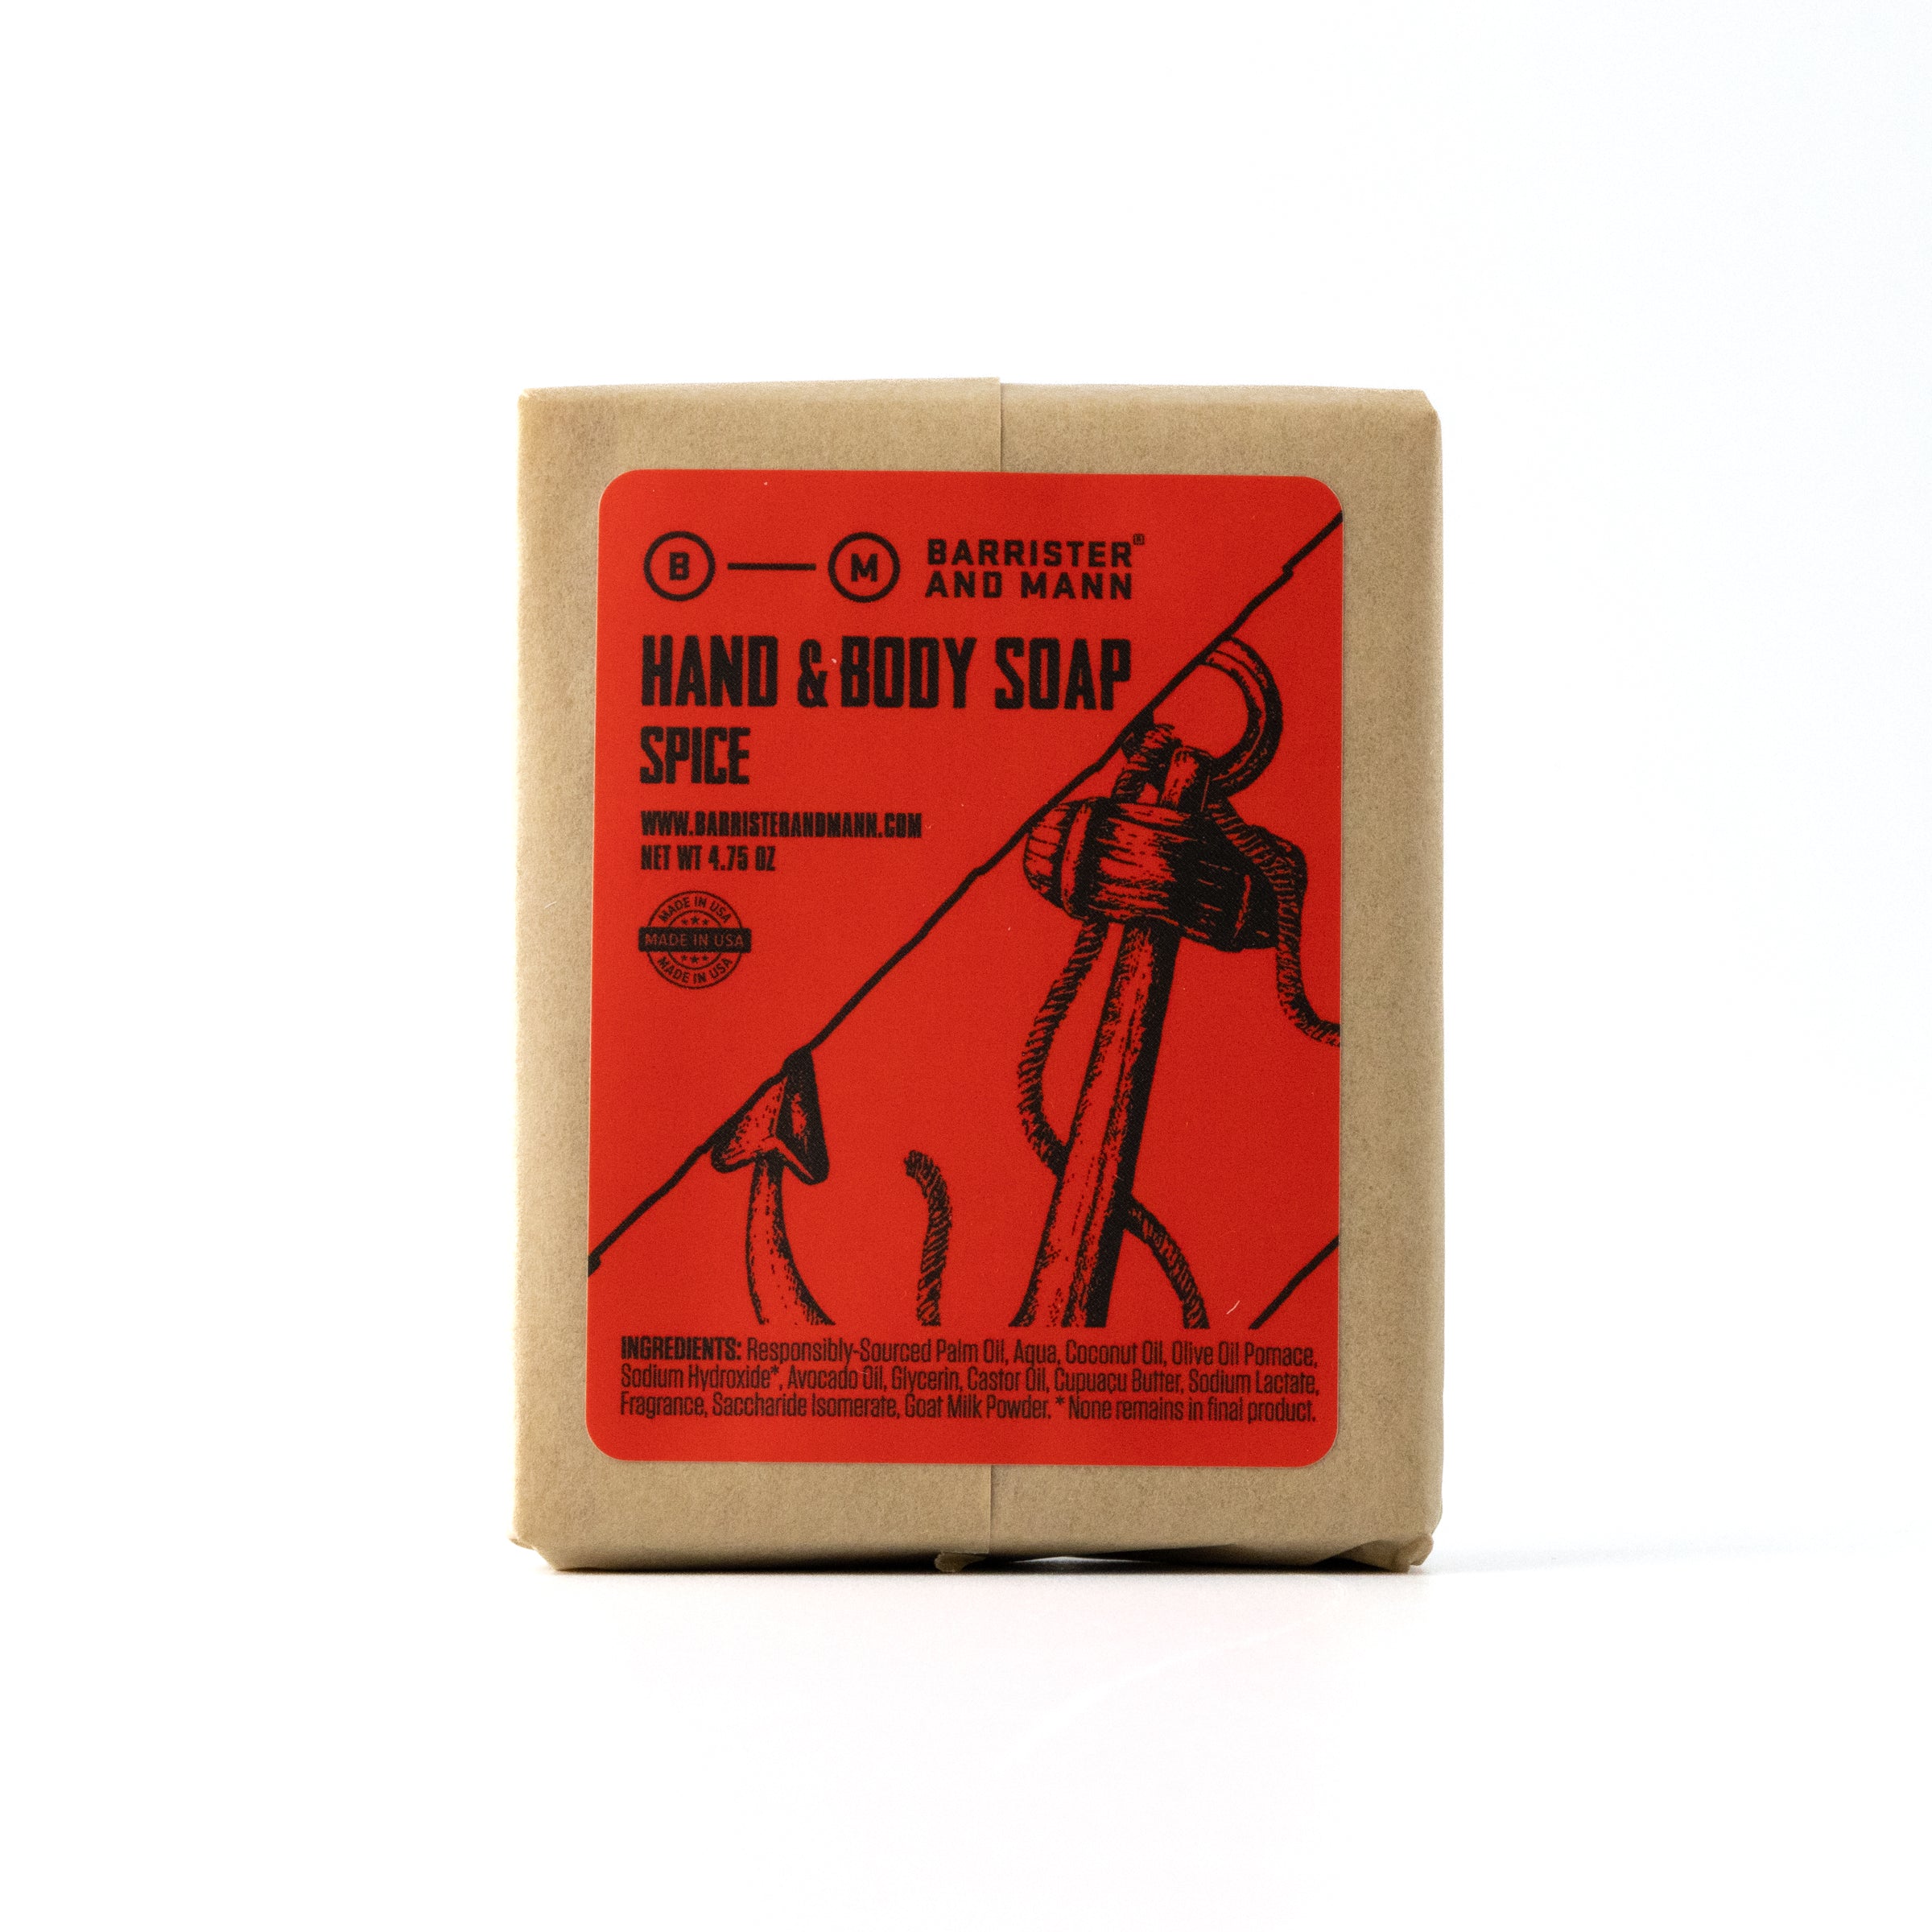 Hand & Body Soap: Spice - Barrister and Mann LLC